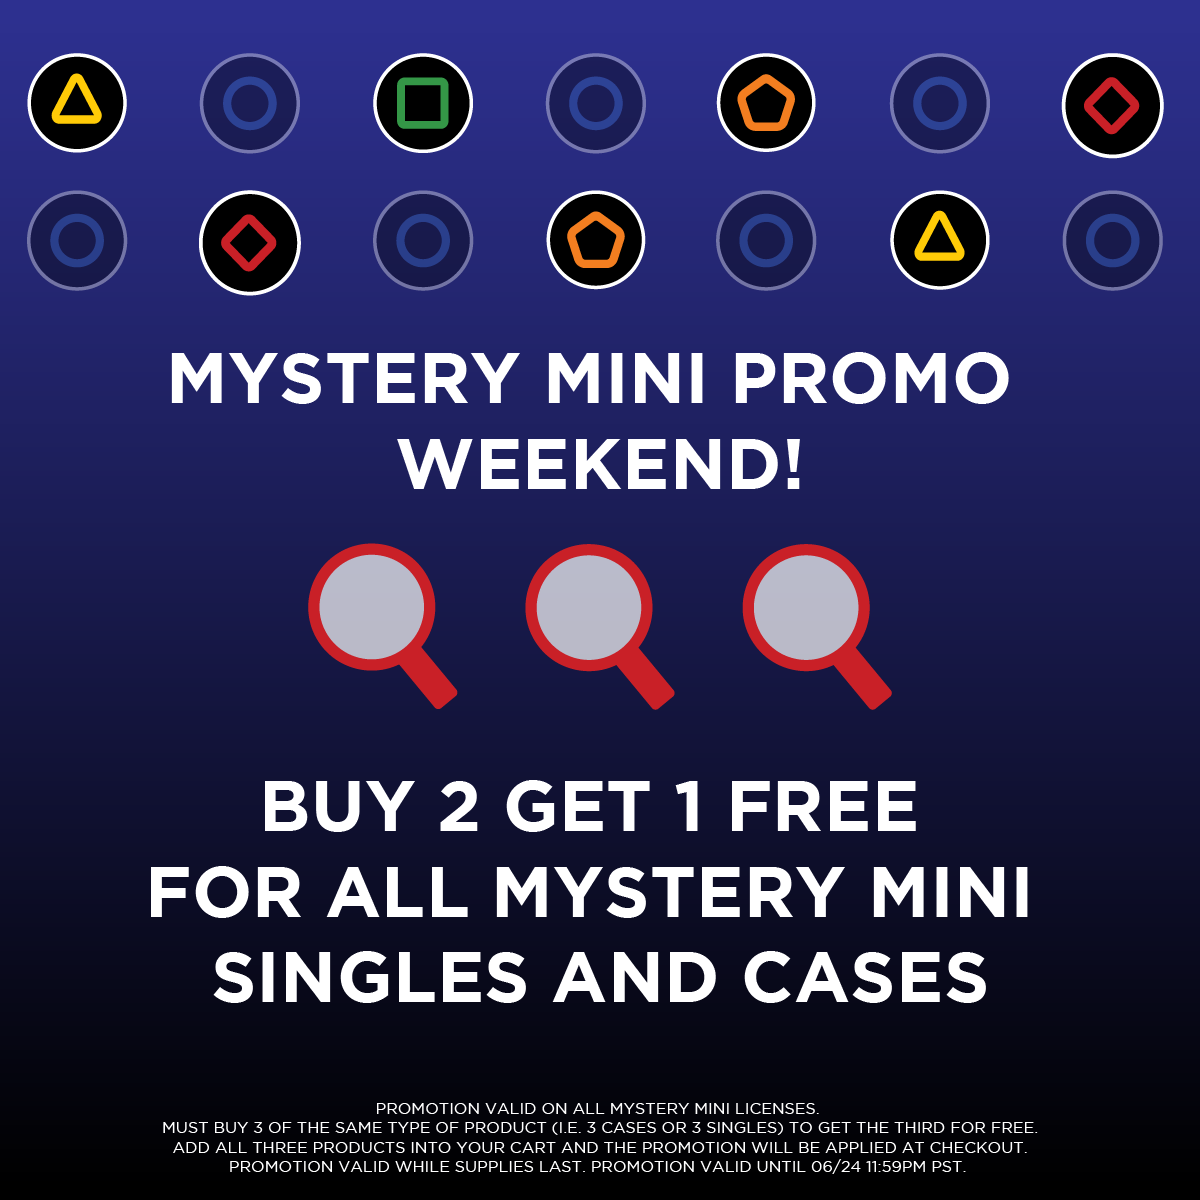 BUY 2 GET 1 FREE For ALL Mystery Mini Singles and Cases!